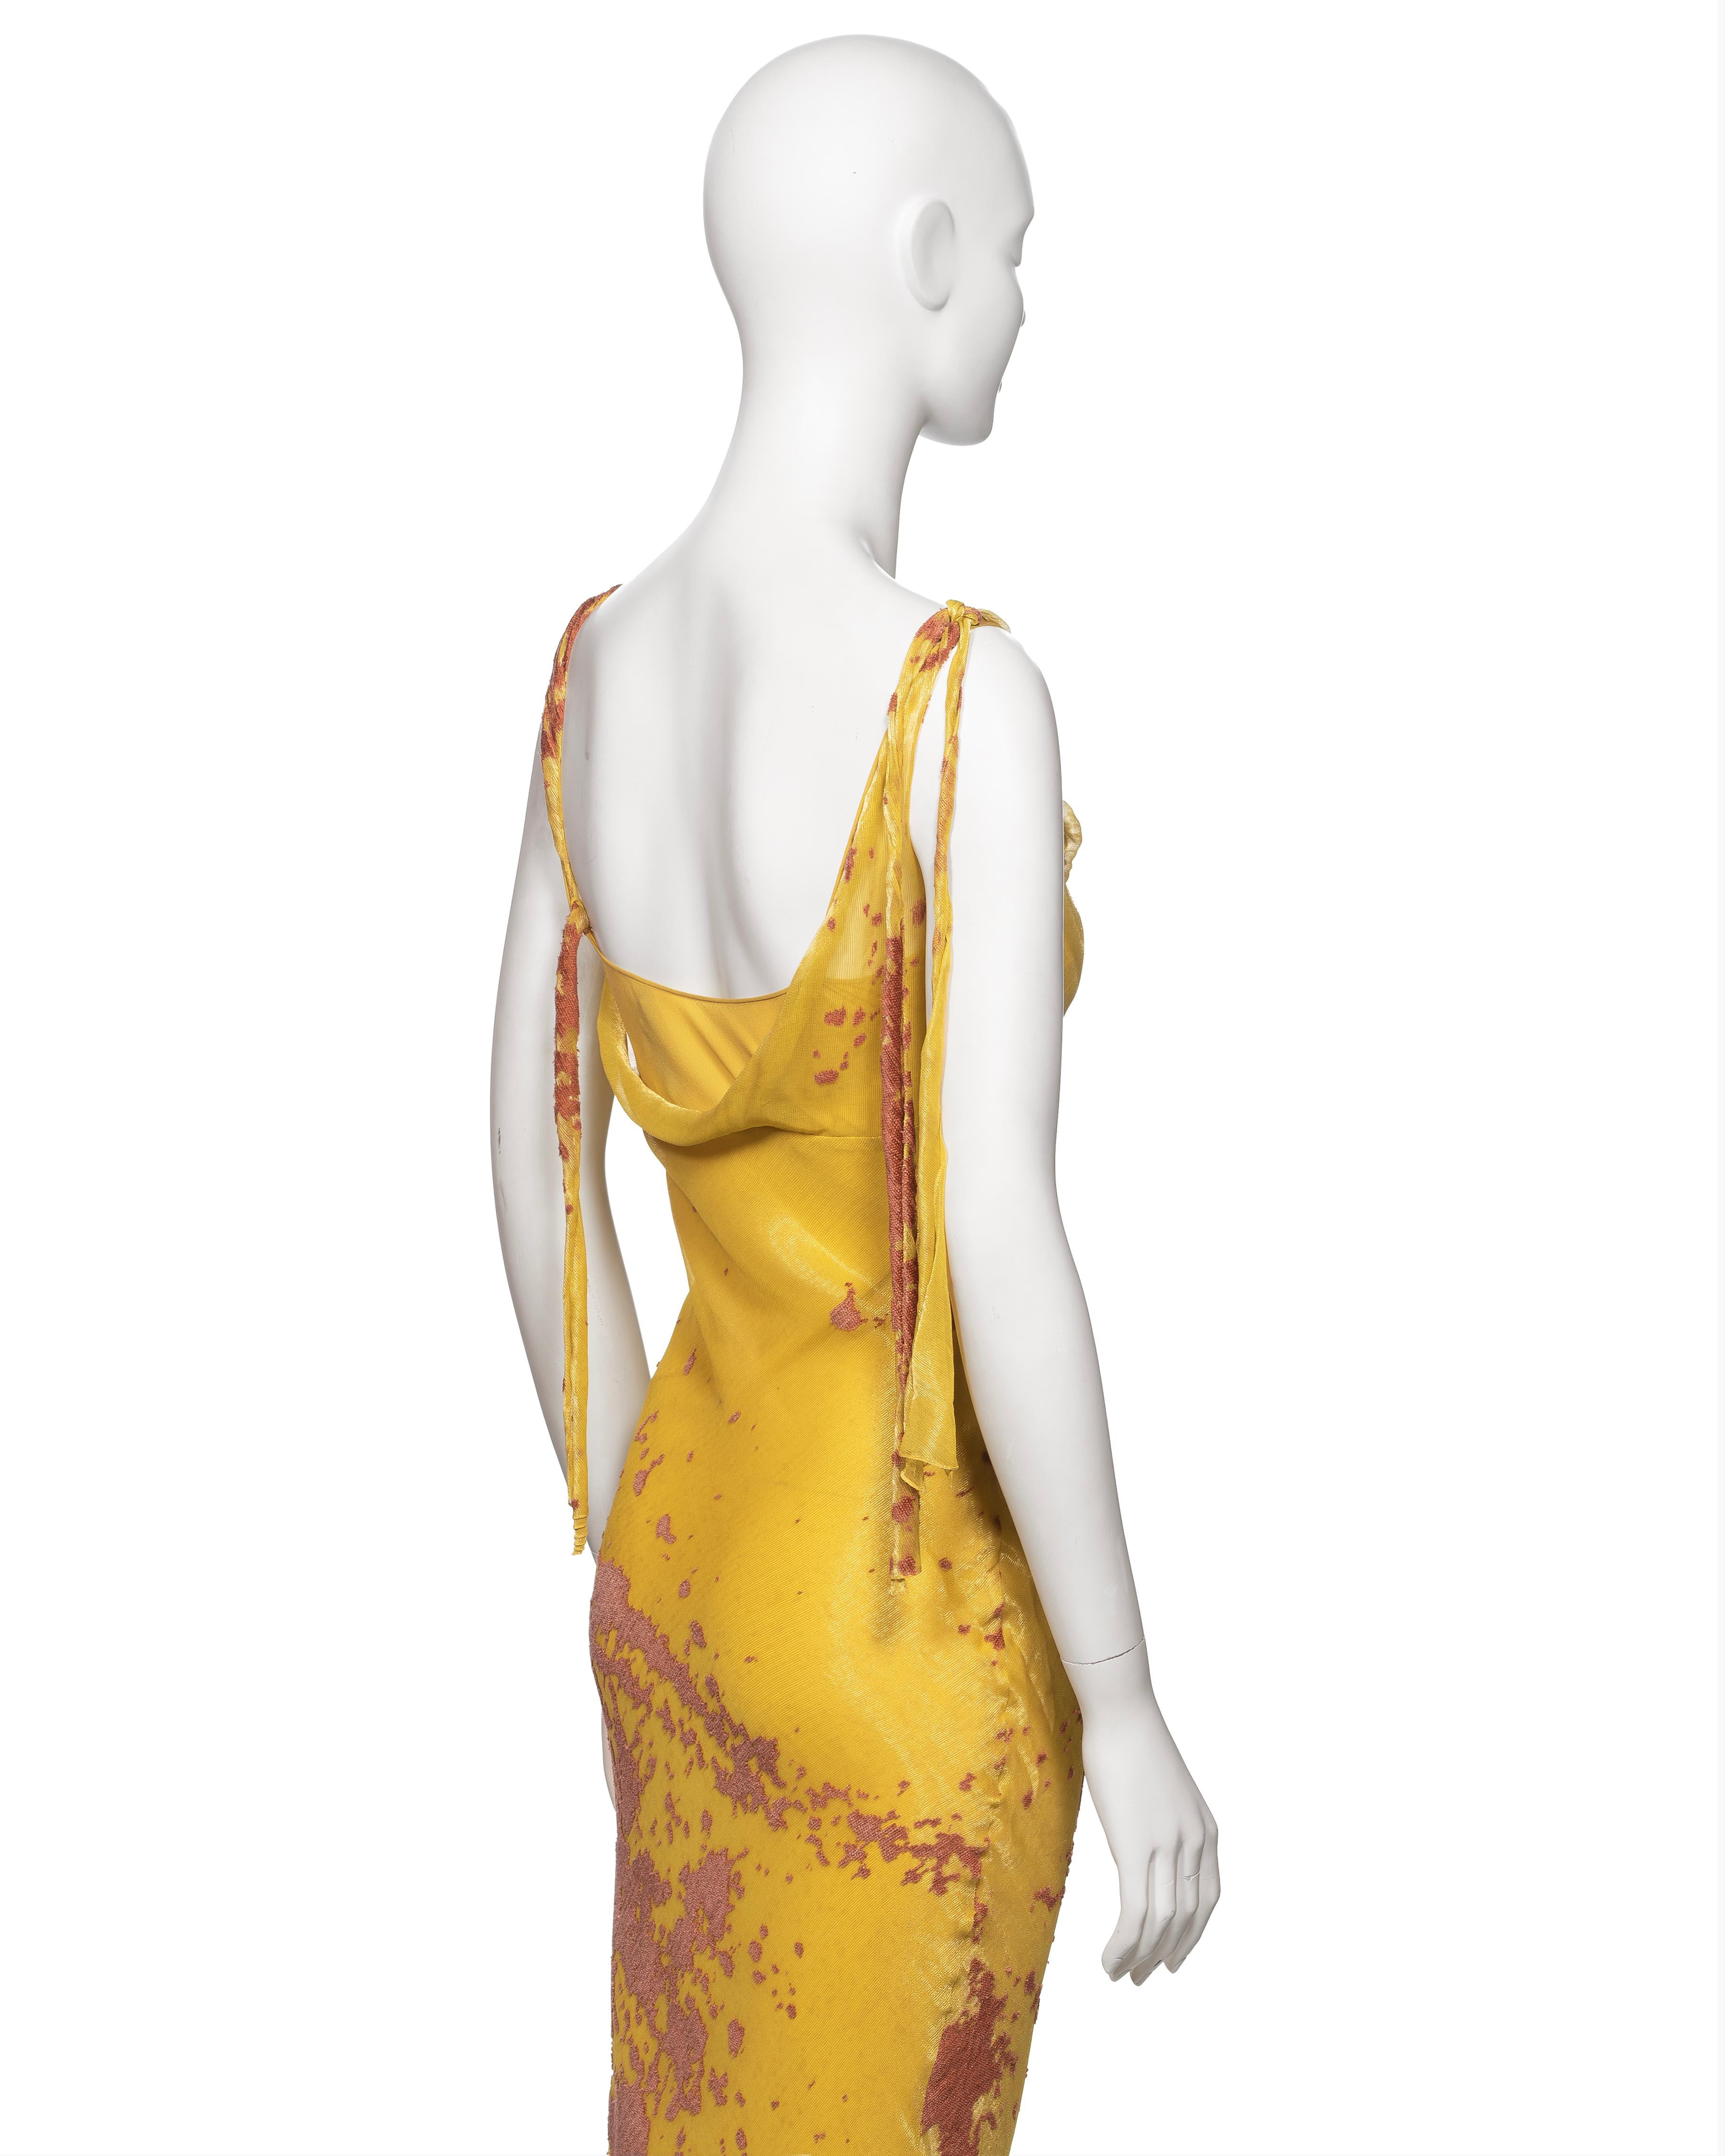 John Galliano Metallic Yellow and Peach Lamé and Silk Evening Dress, FW 2000 For Sale 3